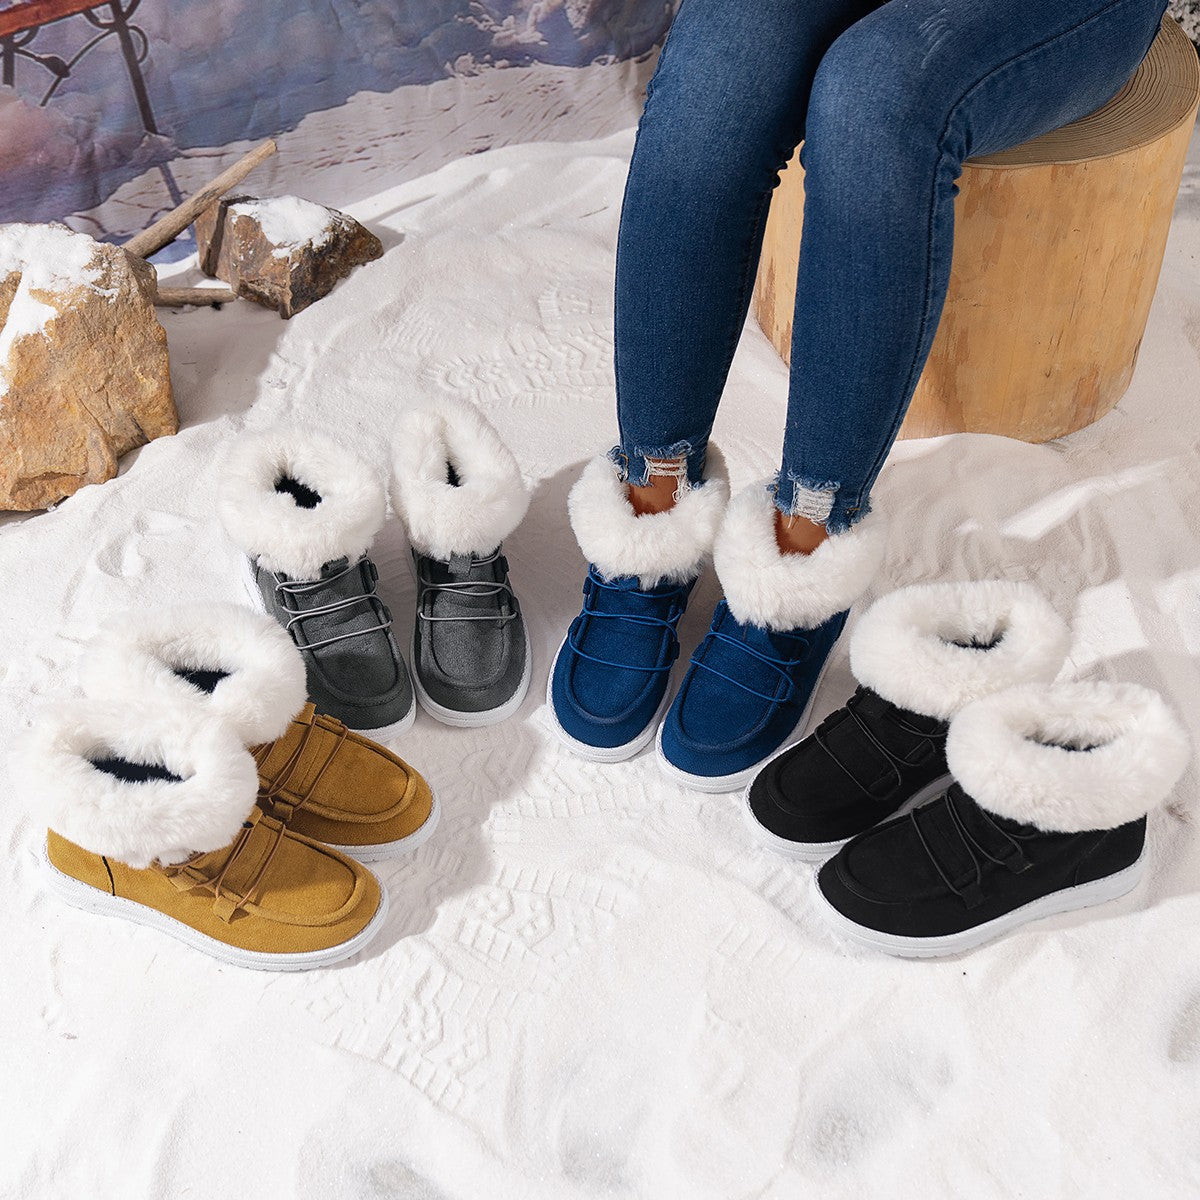 Winter Fleece Snow Boots For Women New Style Furry Casual Flat Plush Shoes Women's Warm Ankle Boots